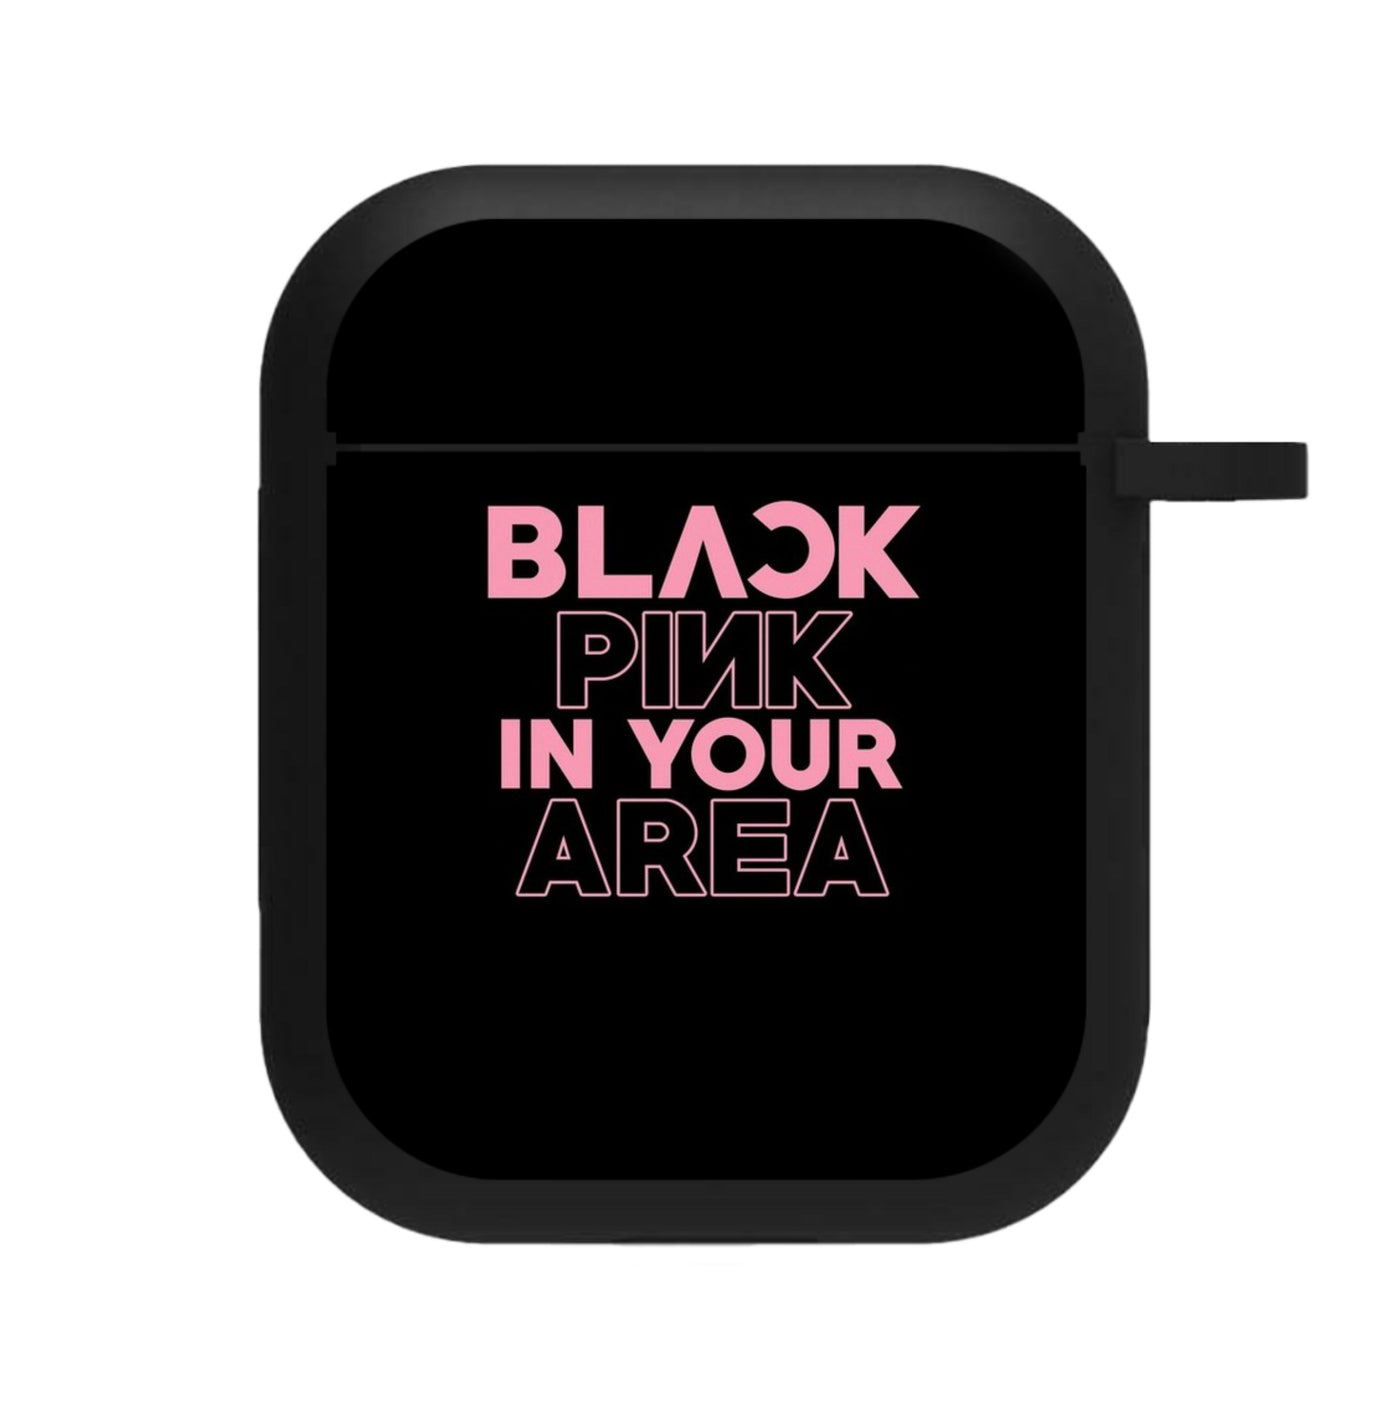 Blackpink In Your Area - Black AirPods Case